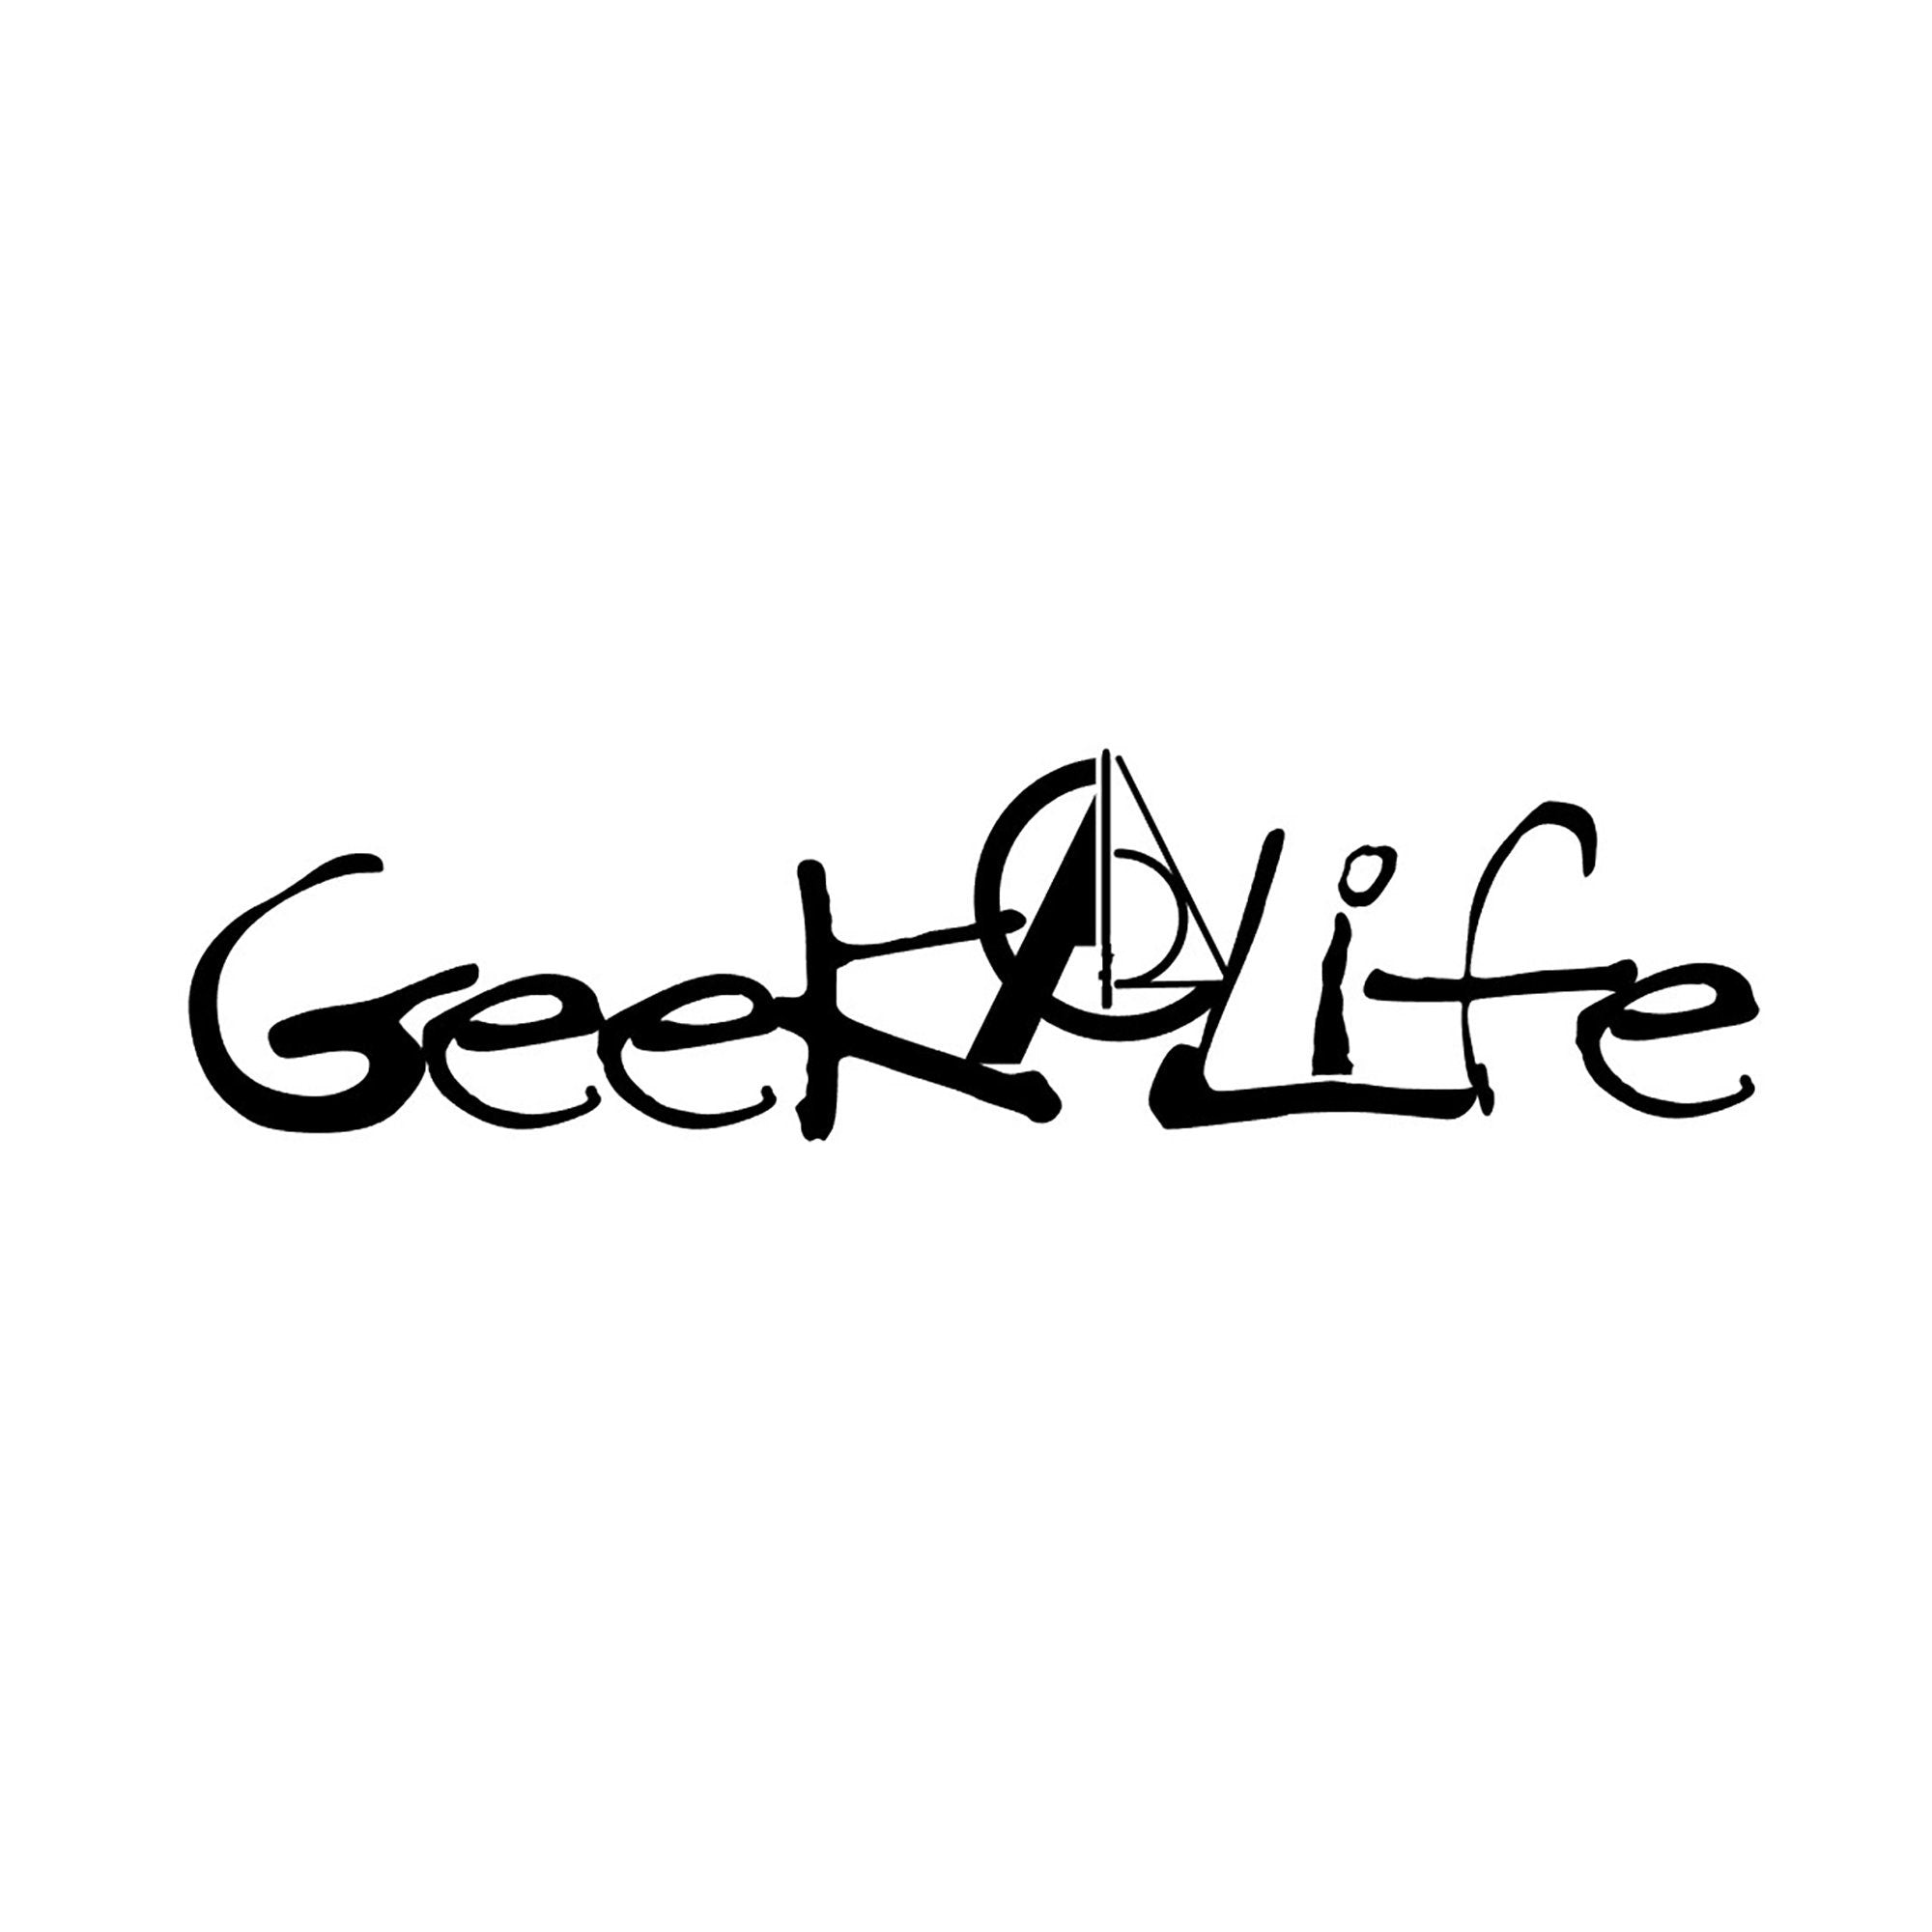 Geek Life Vinyl Decal for Car, Computer, Cups, and more!